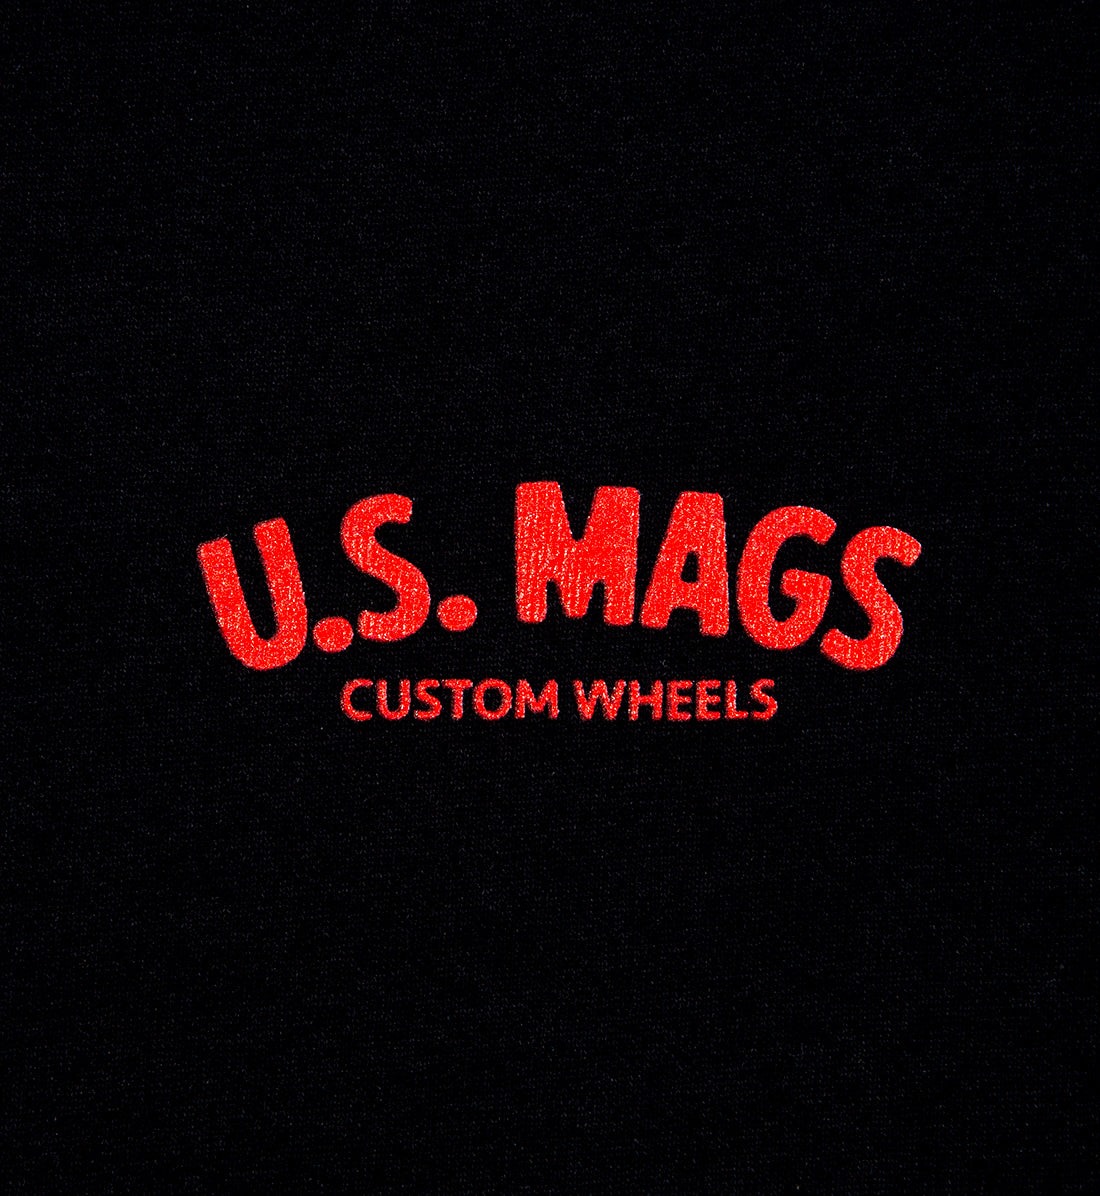 US Mags RED LOGO Short Sleeve Tee